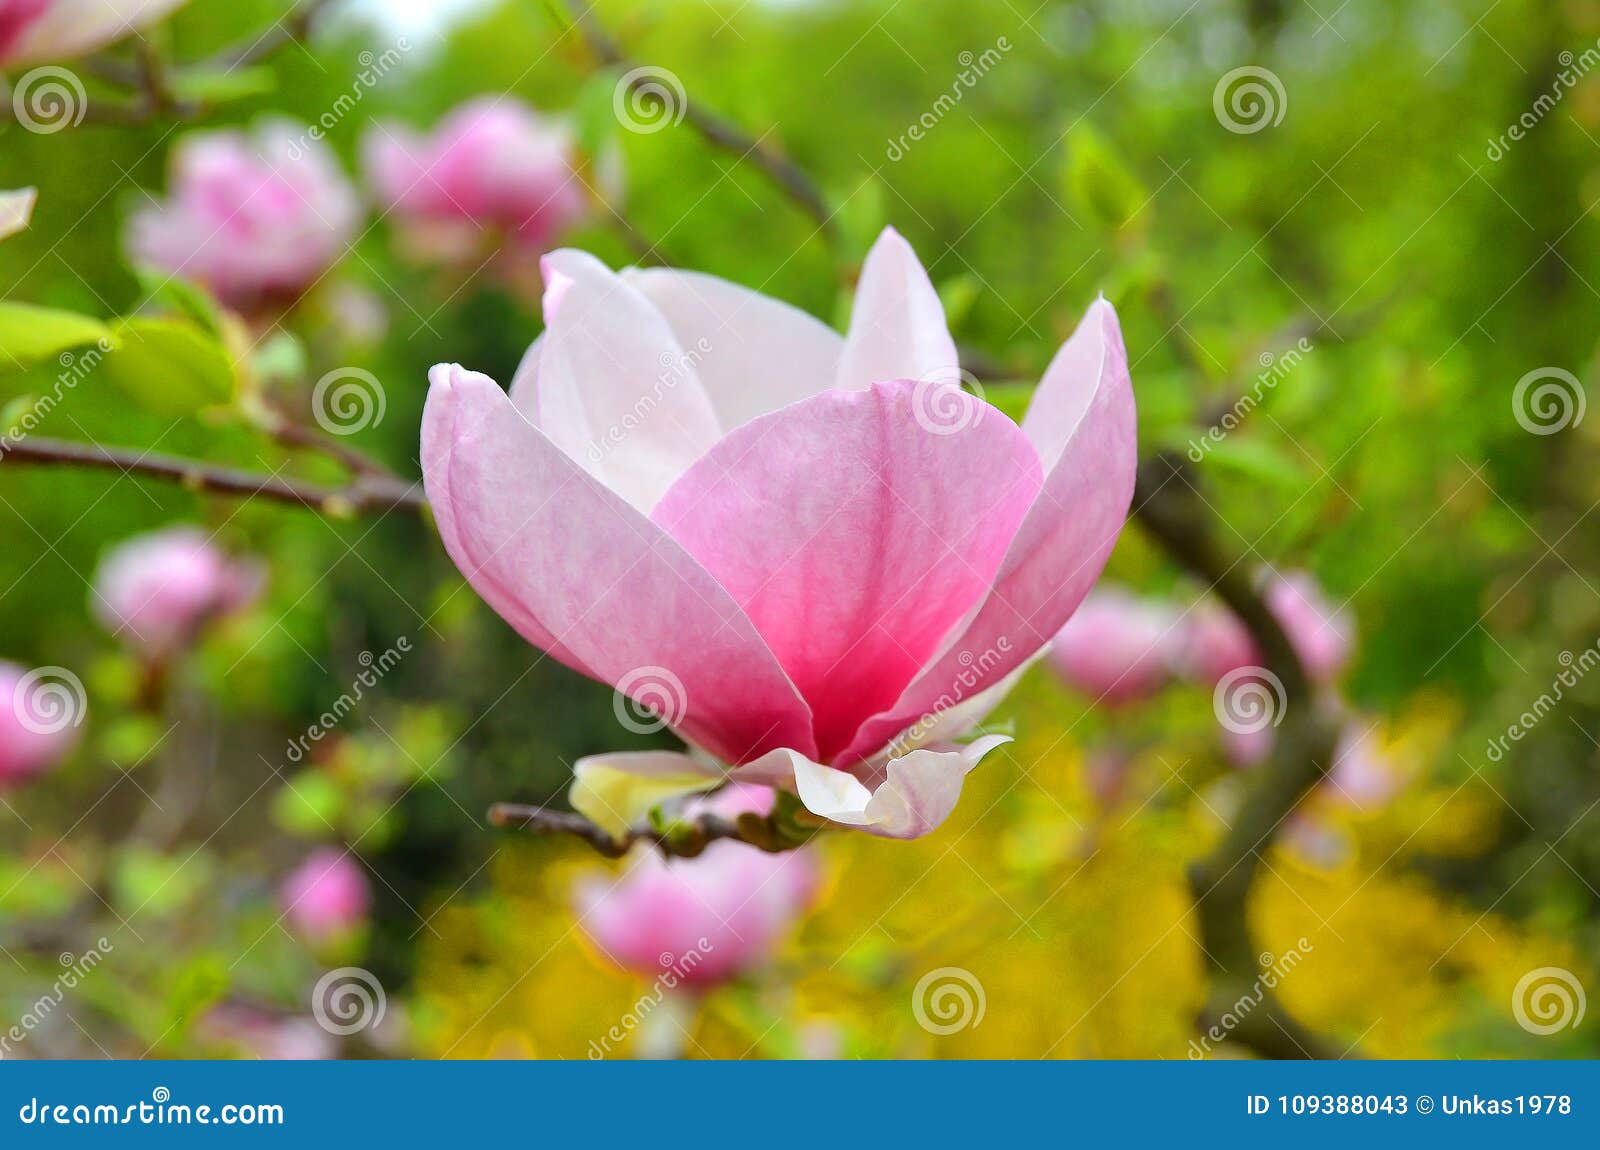 Pink magnolia blossom stock image. Image of blooming - 109388043